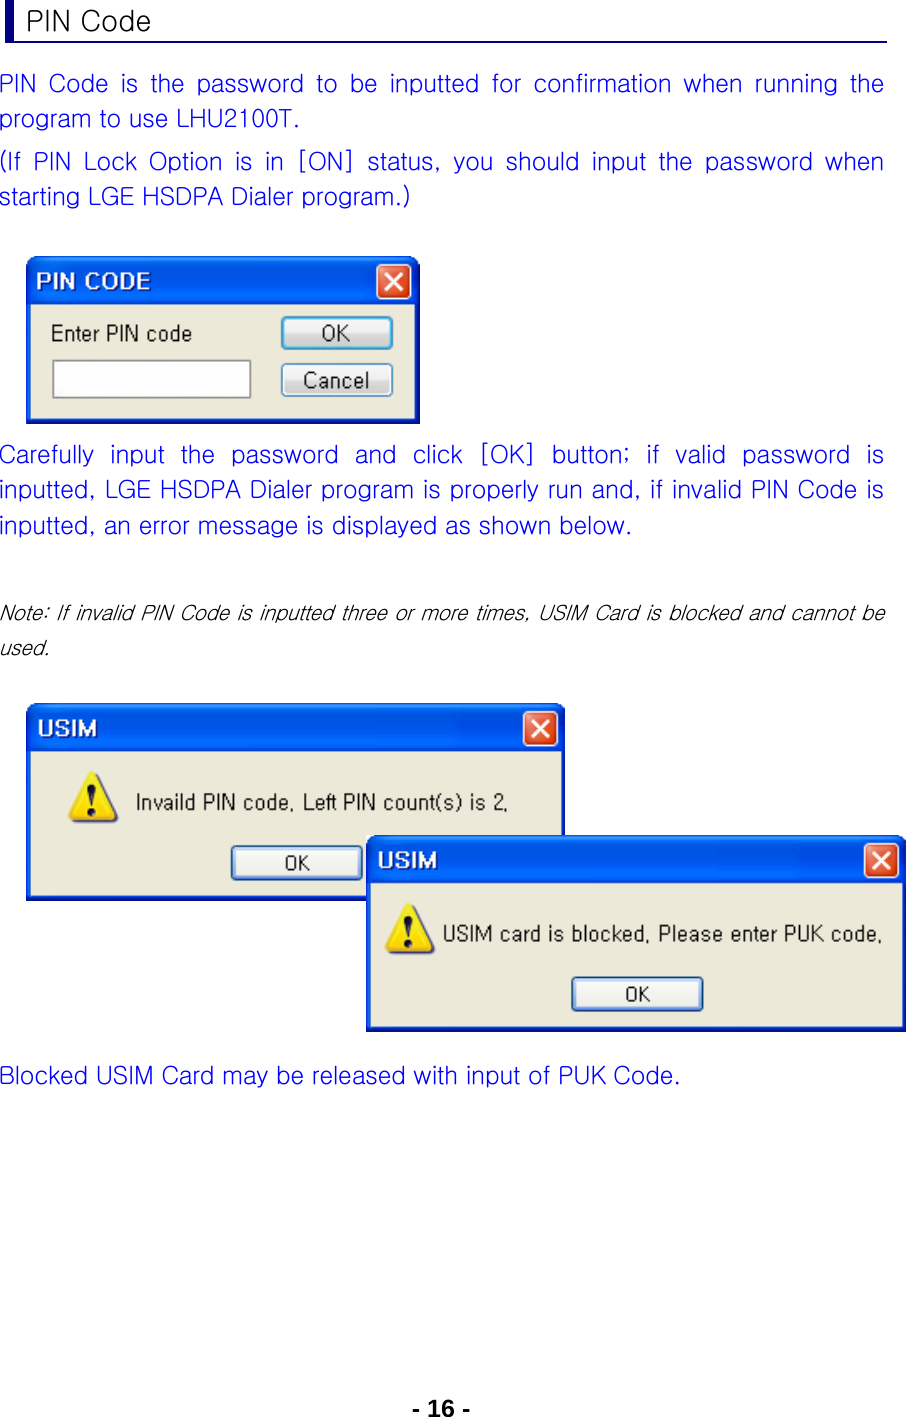 - 16 - PIN Code PIN Code is the password to be inputted for confirmation when running  the program to use LHU2100T. (If  PIN  Lock  Option  is  in  [ON]  status,  you  should  input  the  password  when starting LGE HSDPA Dialer program.)      Carefully input the password and click [OK] button; if valid password  is inputted, LGE HSDPA Dialer program is properly run and, if invalid PIN Code is inputted, an error message is displayed as shown below.  Note: If invalid PIN Code is inputted three or more times, USIM Card is blocked and cannot be used.          Blocked USIM Card may be released with input of PUK Code.   